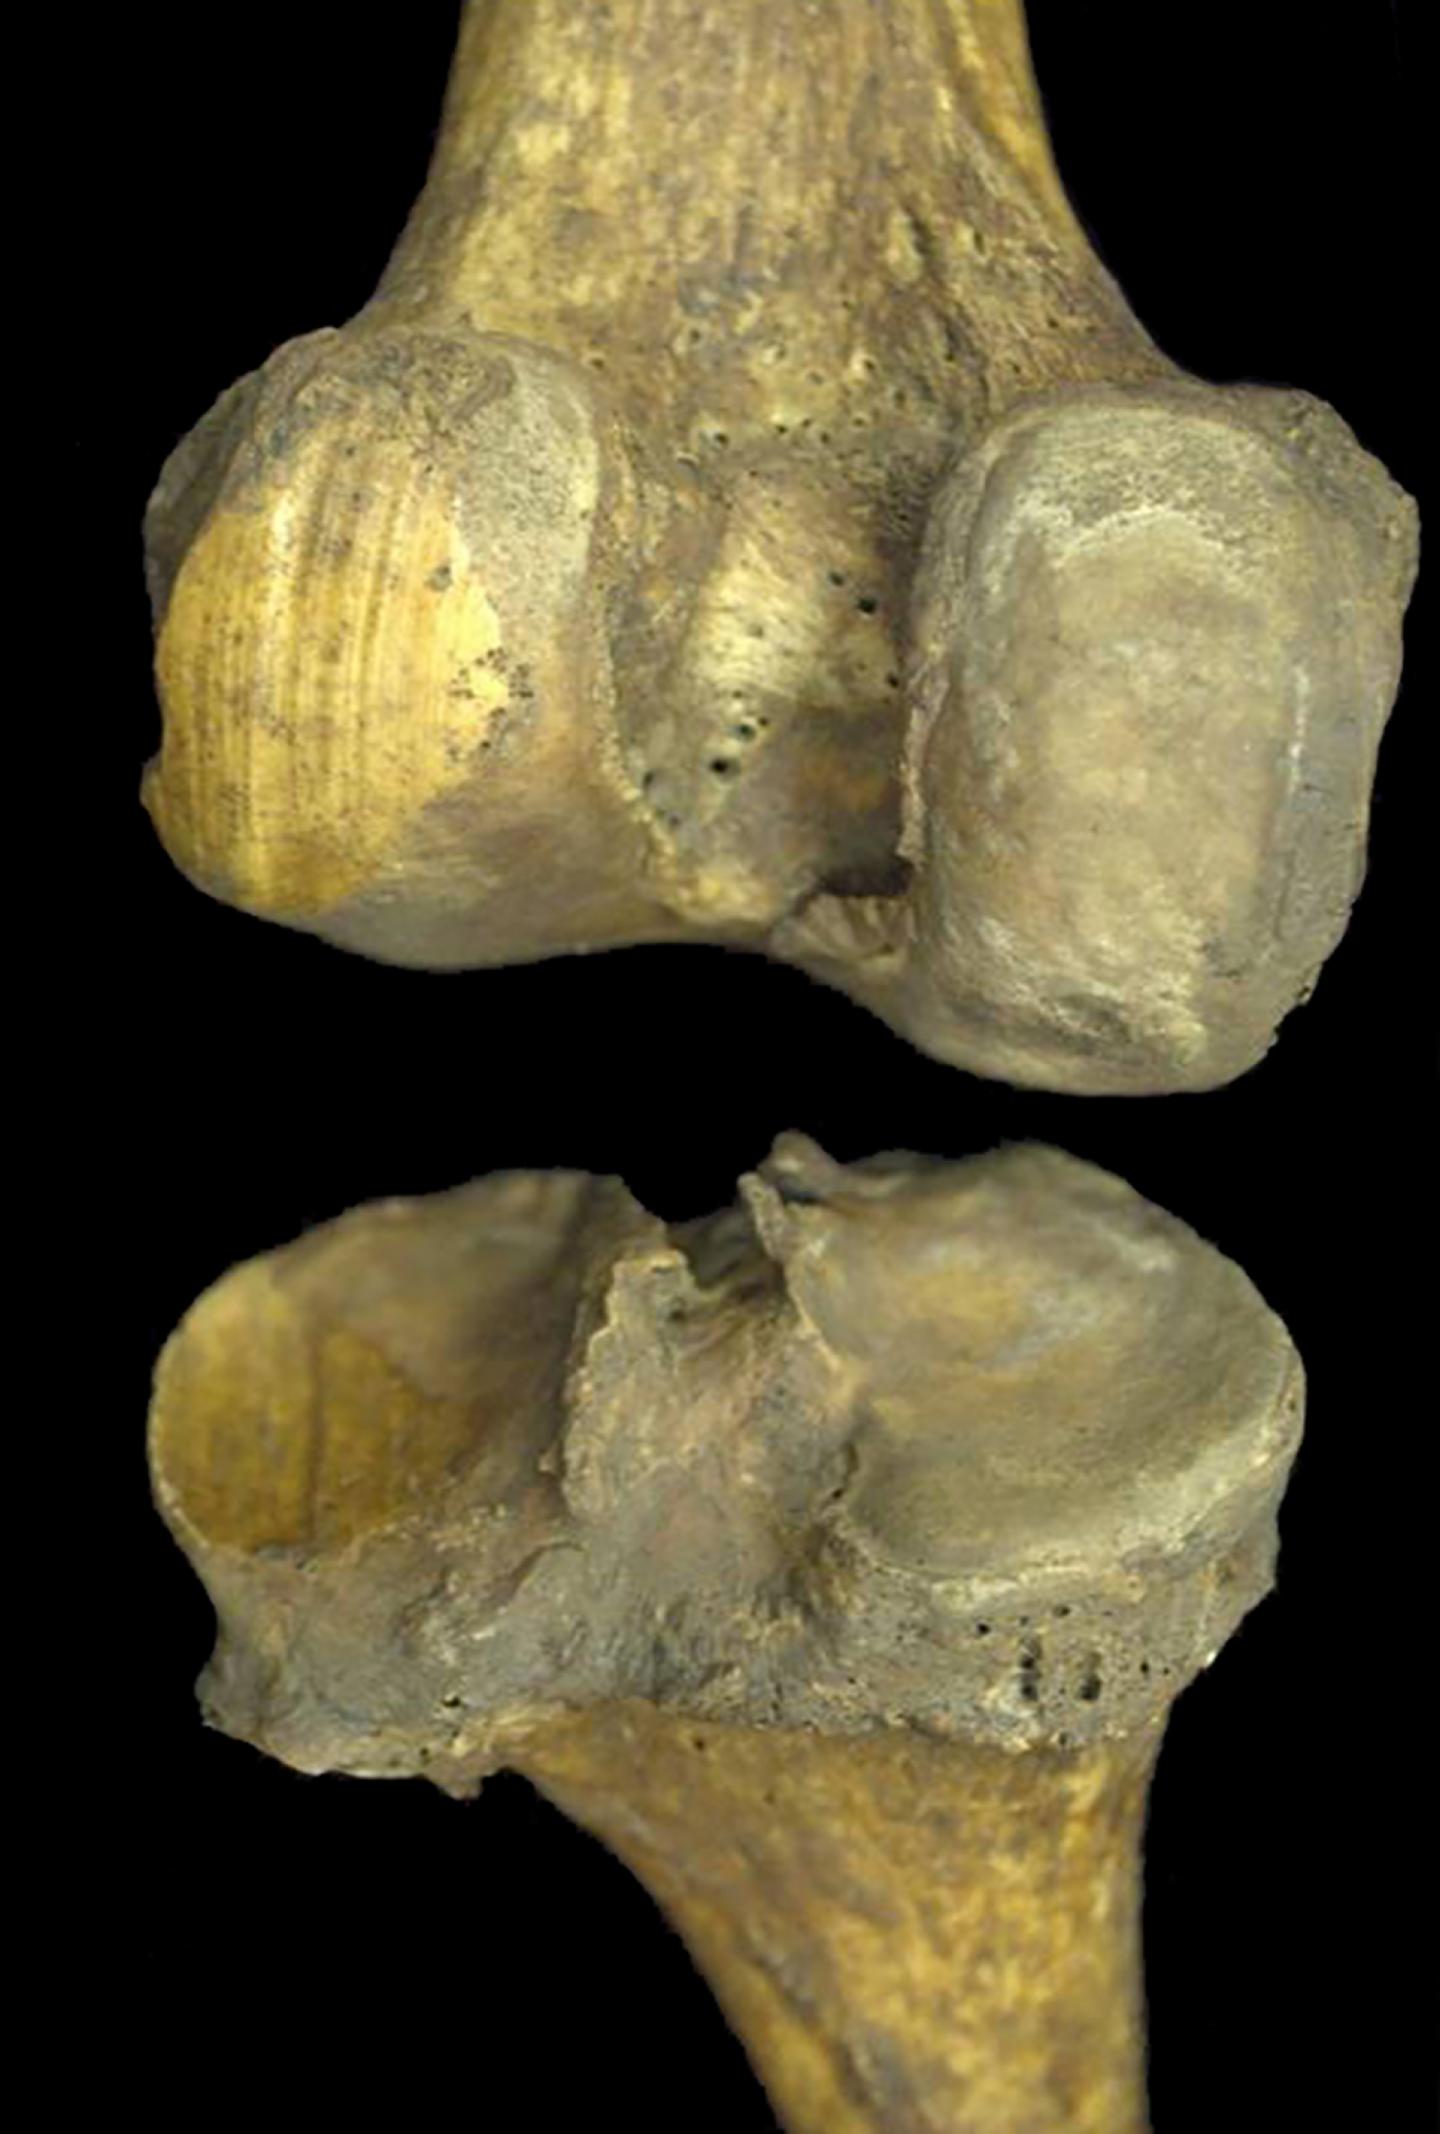 An Archaeological Sample with Traces of Bone-on-Bone Contact